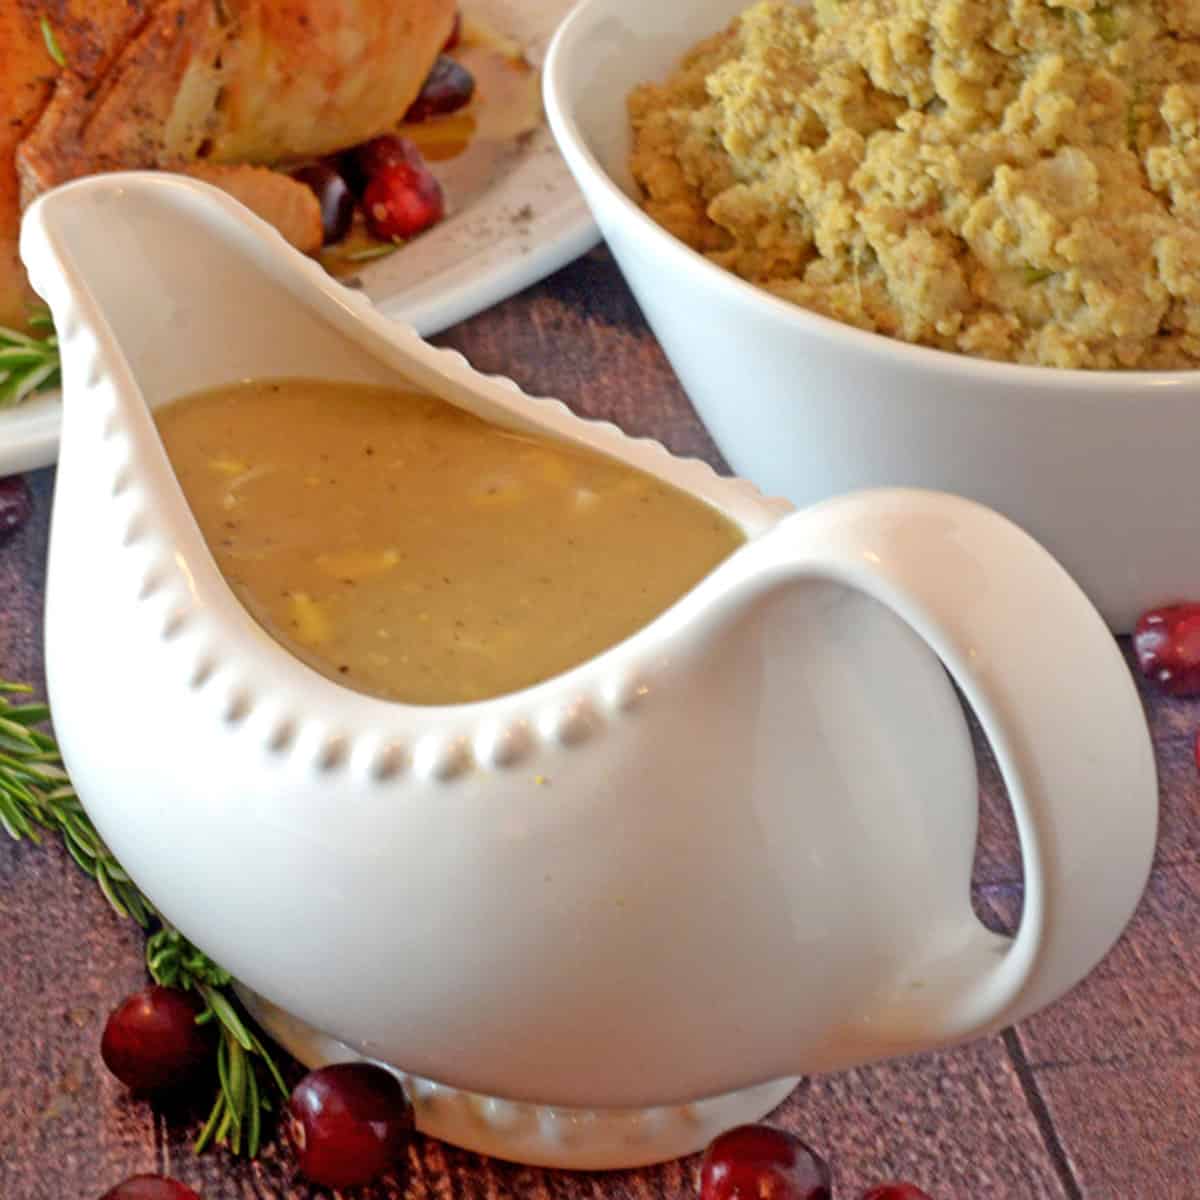 A white gravy bowl of turkey giblet gravy and a bowl of stuffing.